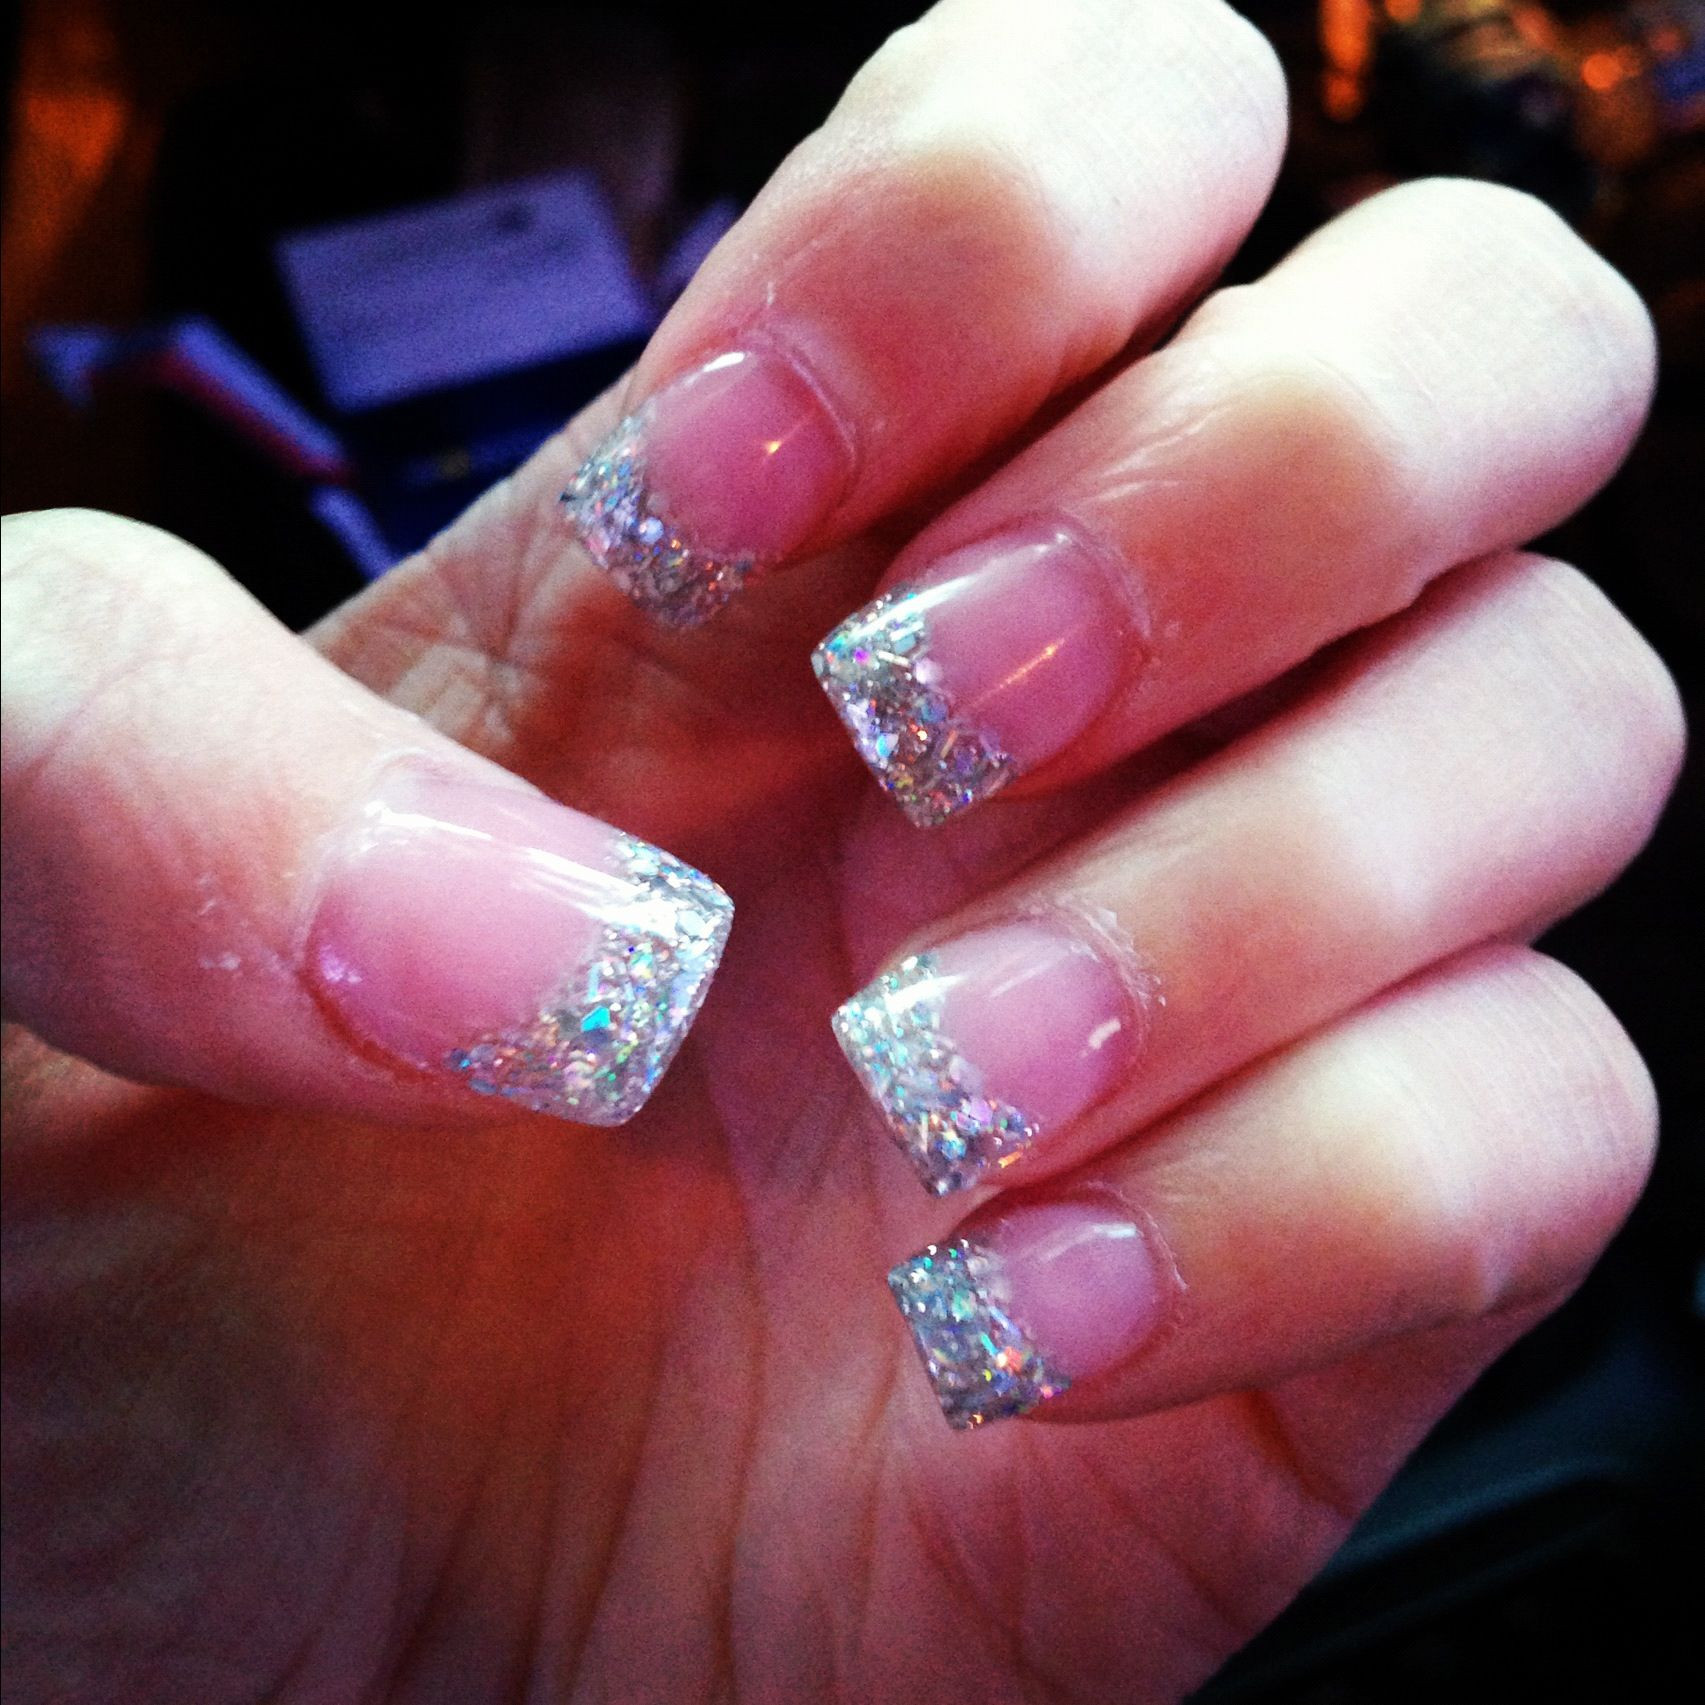 Glitter Tip Acrylic Nails
 Pink and white acrylic with glitter tips